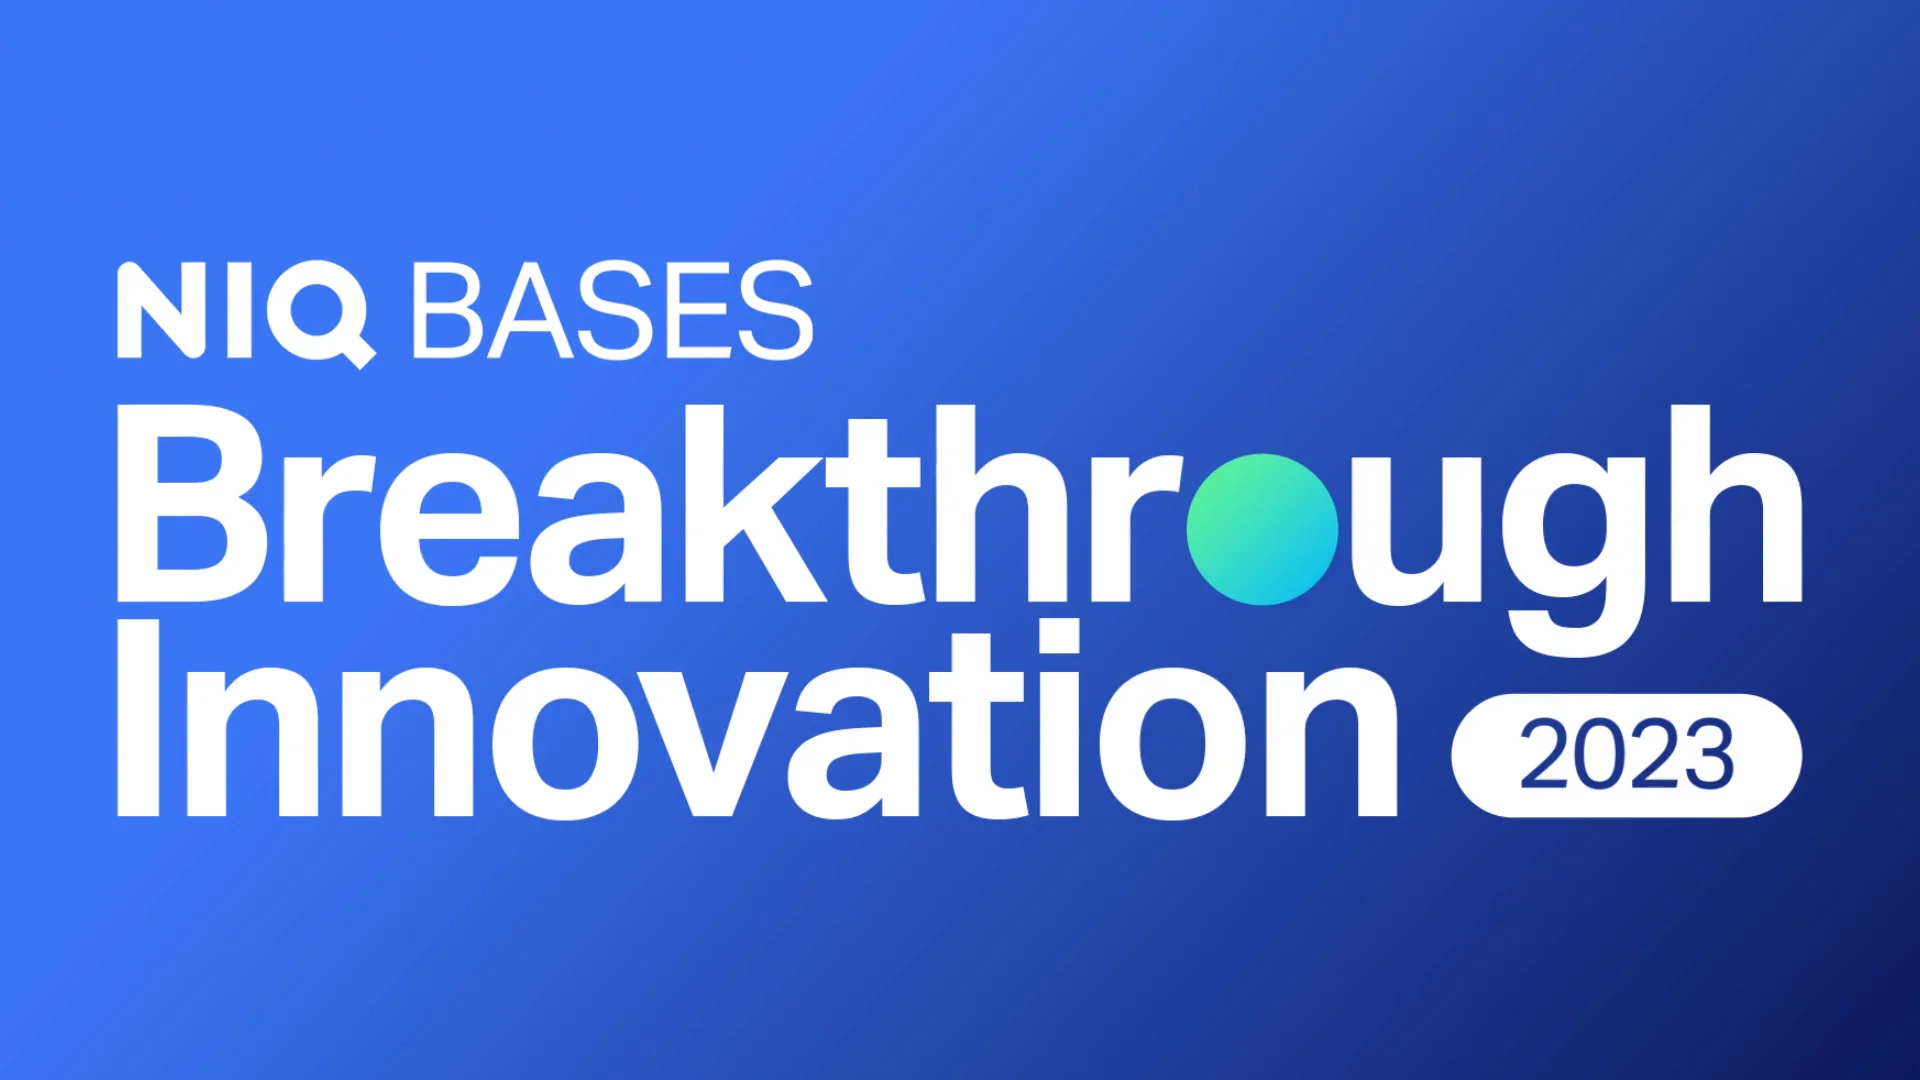 Breakthrough innovations: Top European beverage launches